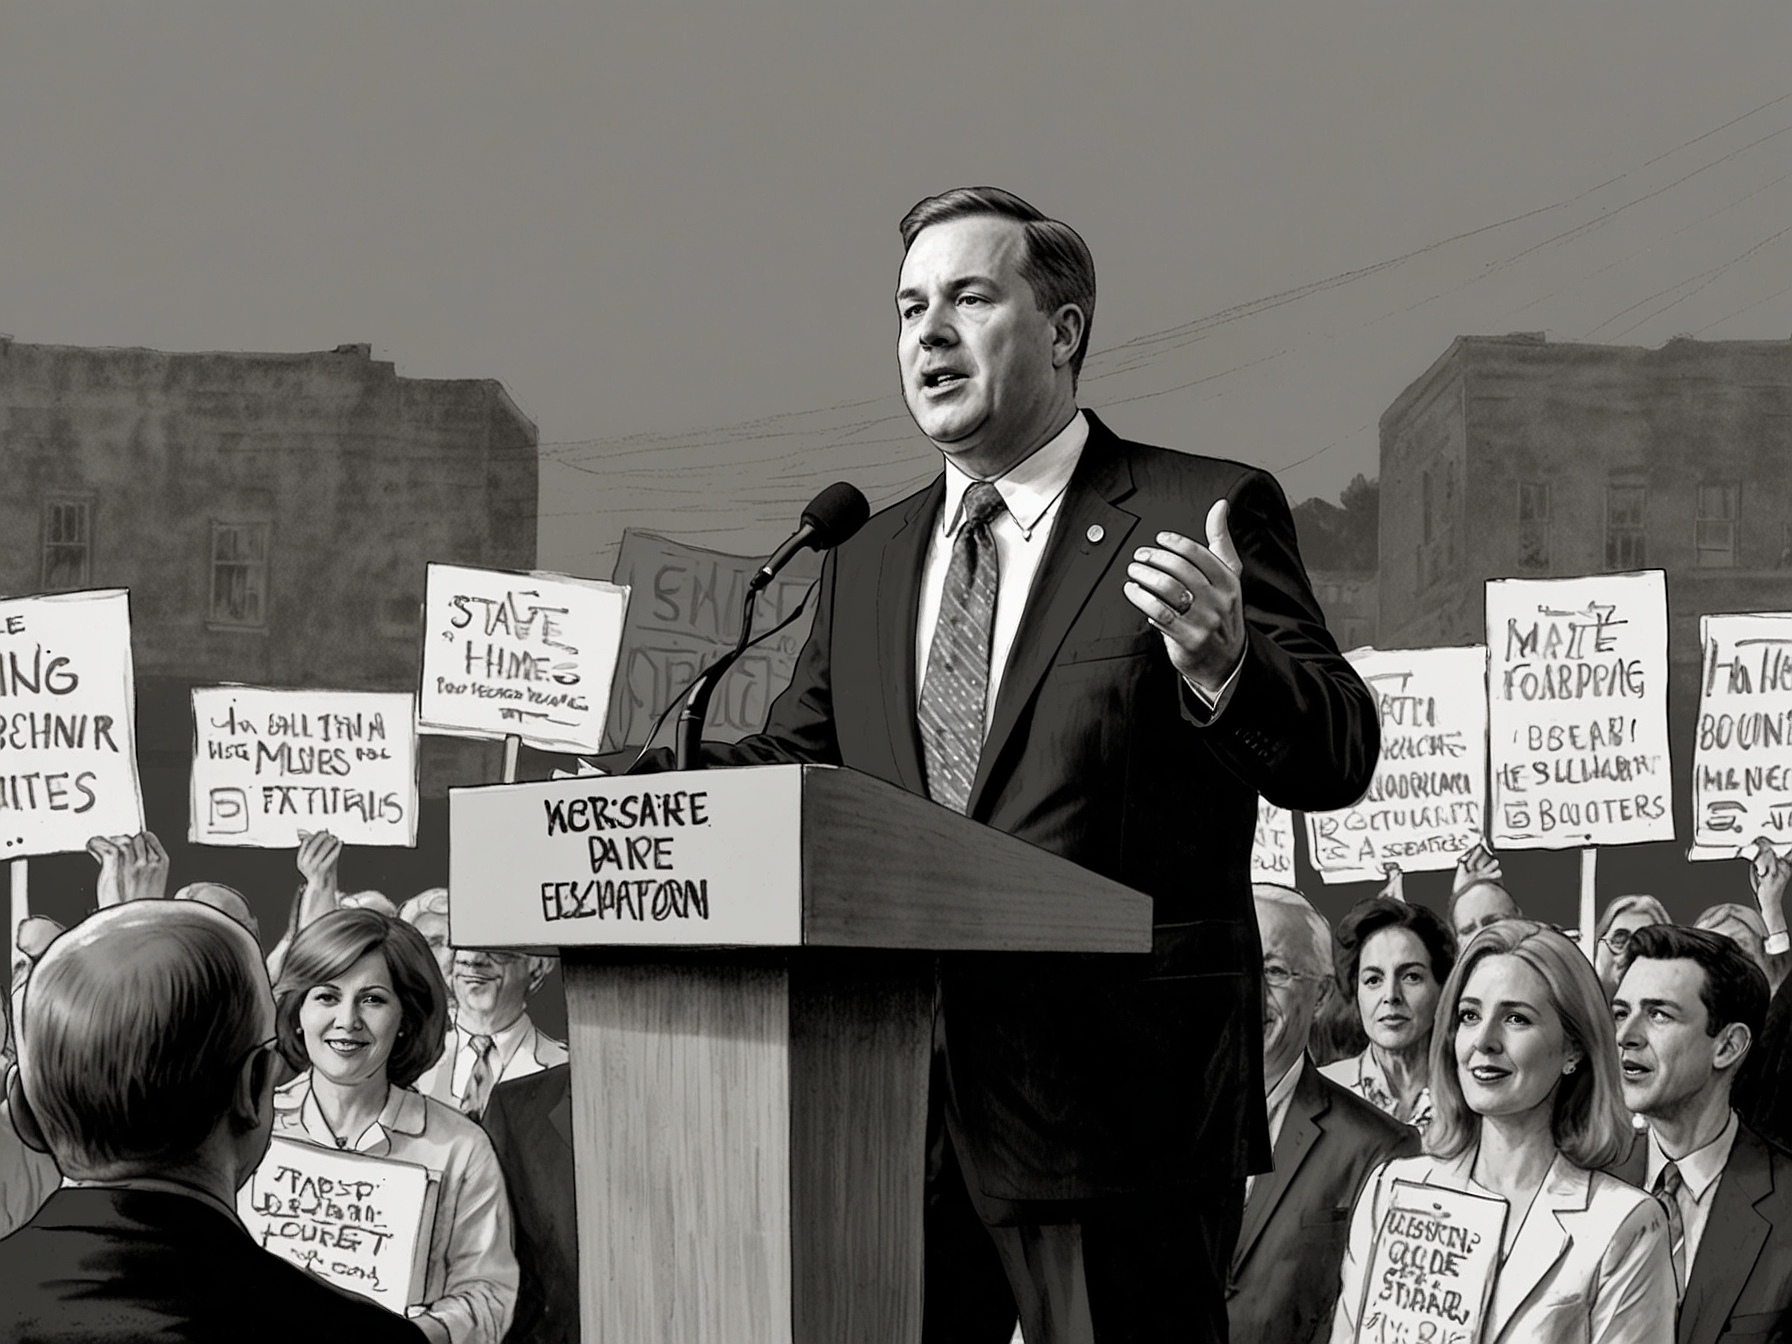 State Senator John McGuire speaking at a campaign rally, highlighting his firm support for Israel and other Republican legislative priorities, with supporters in the background waving campaign signs.